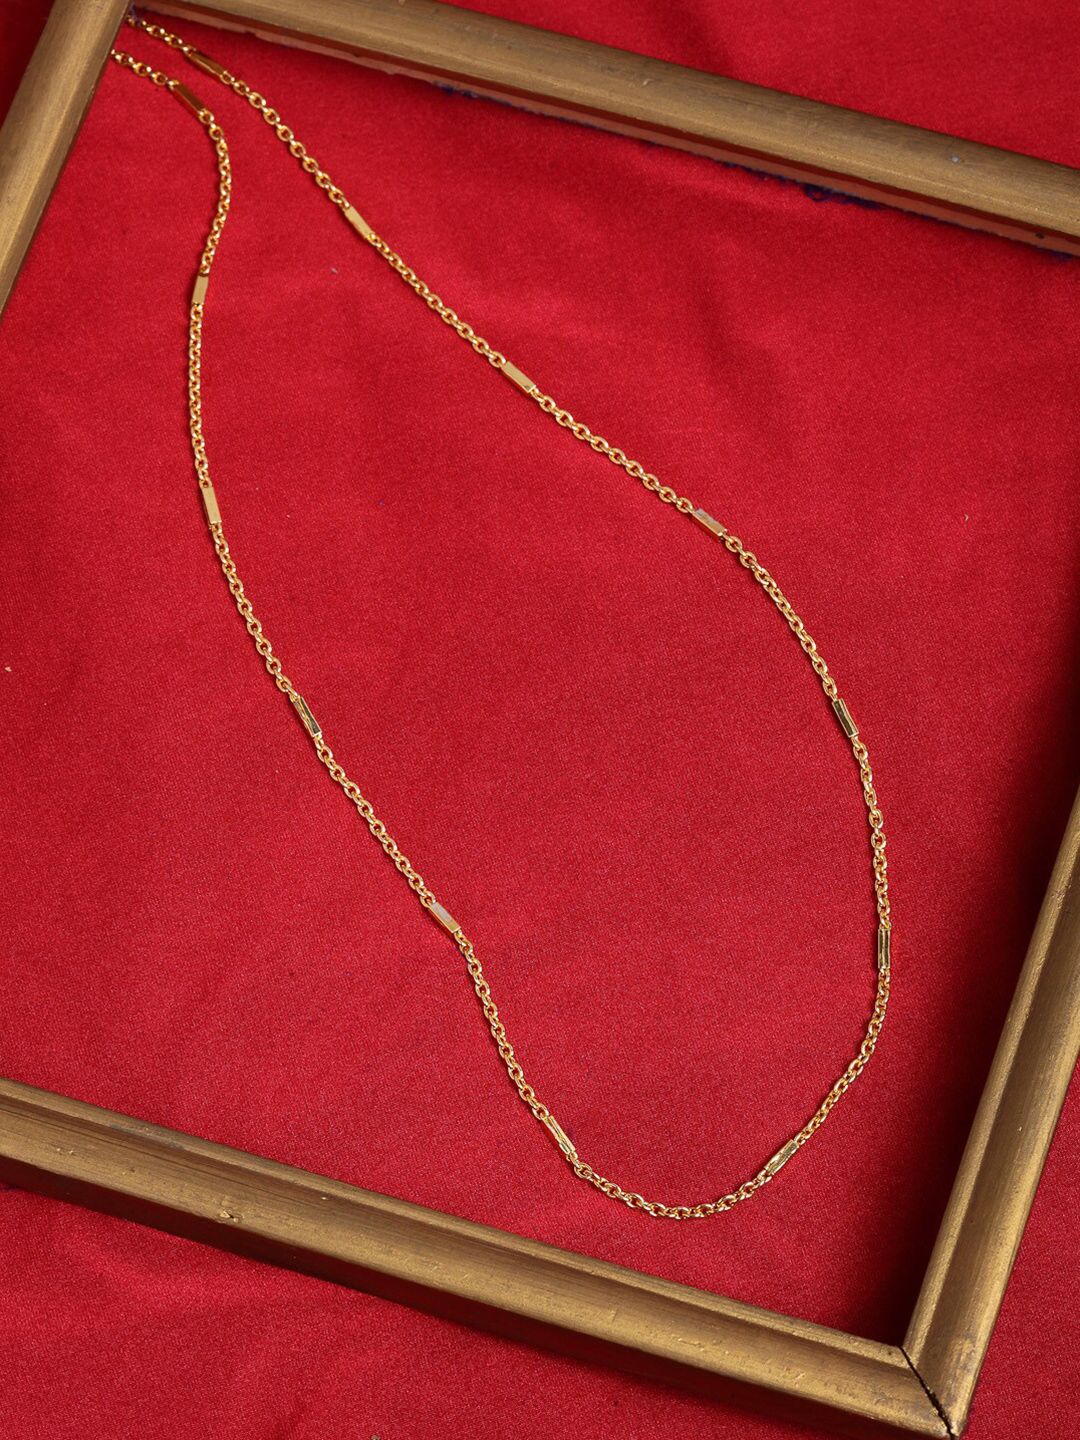 PANASH Gold-Plated Sleek Chain Price in India